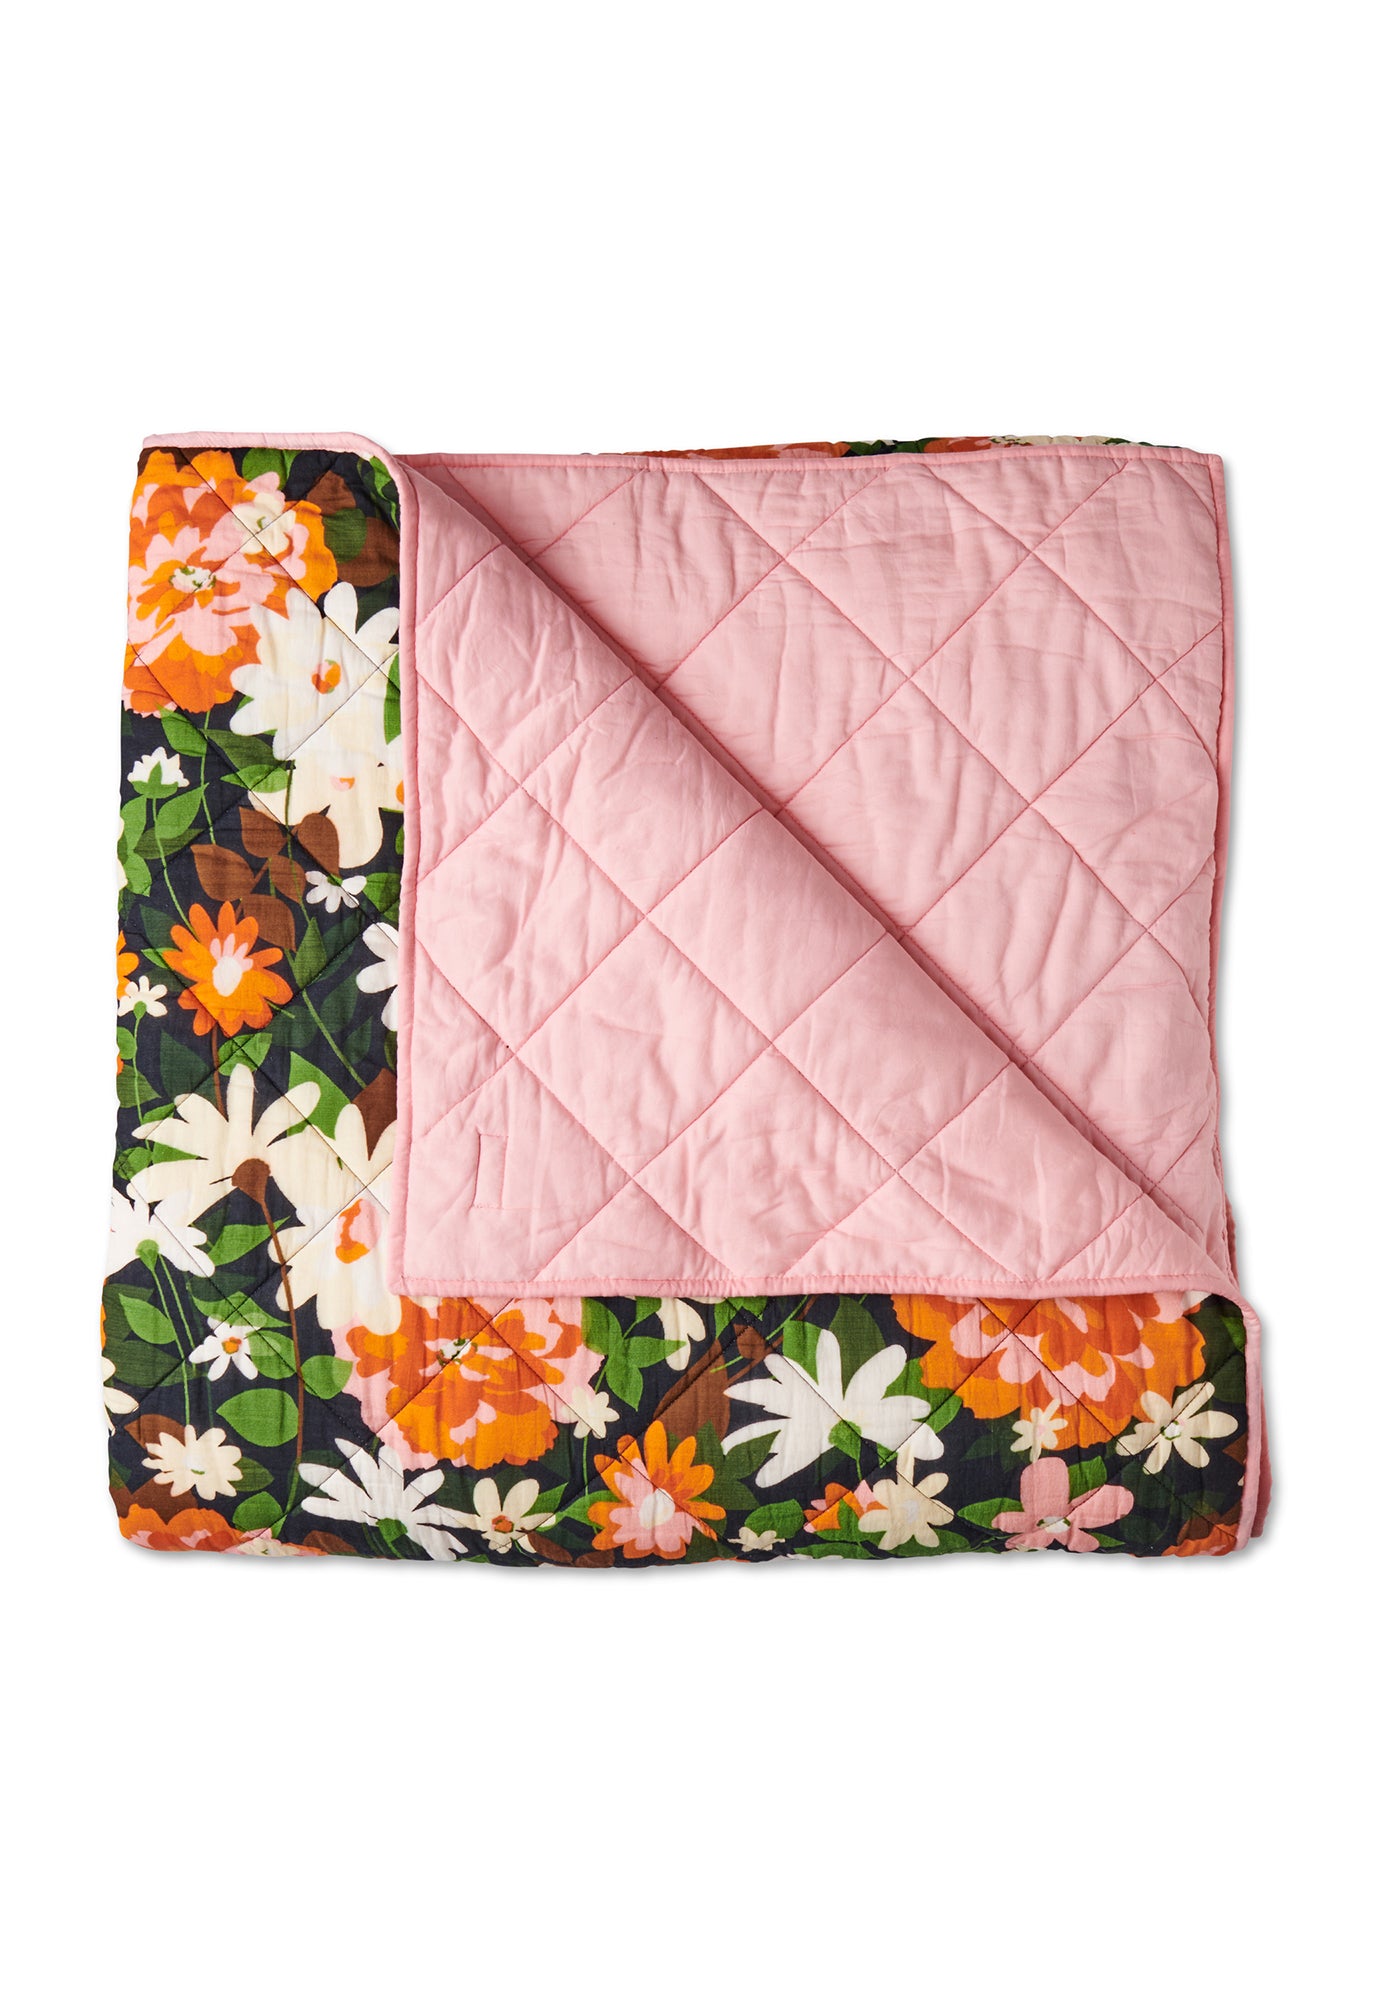 kip&co - dreamy floral tapestry throw